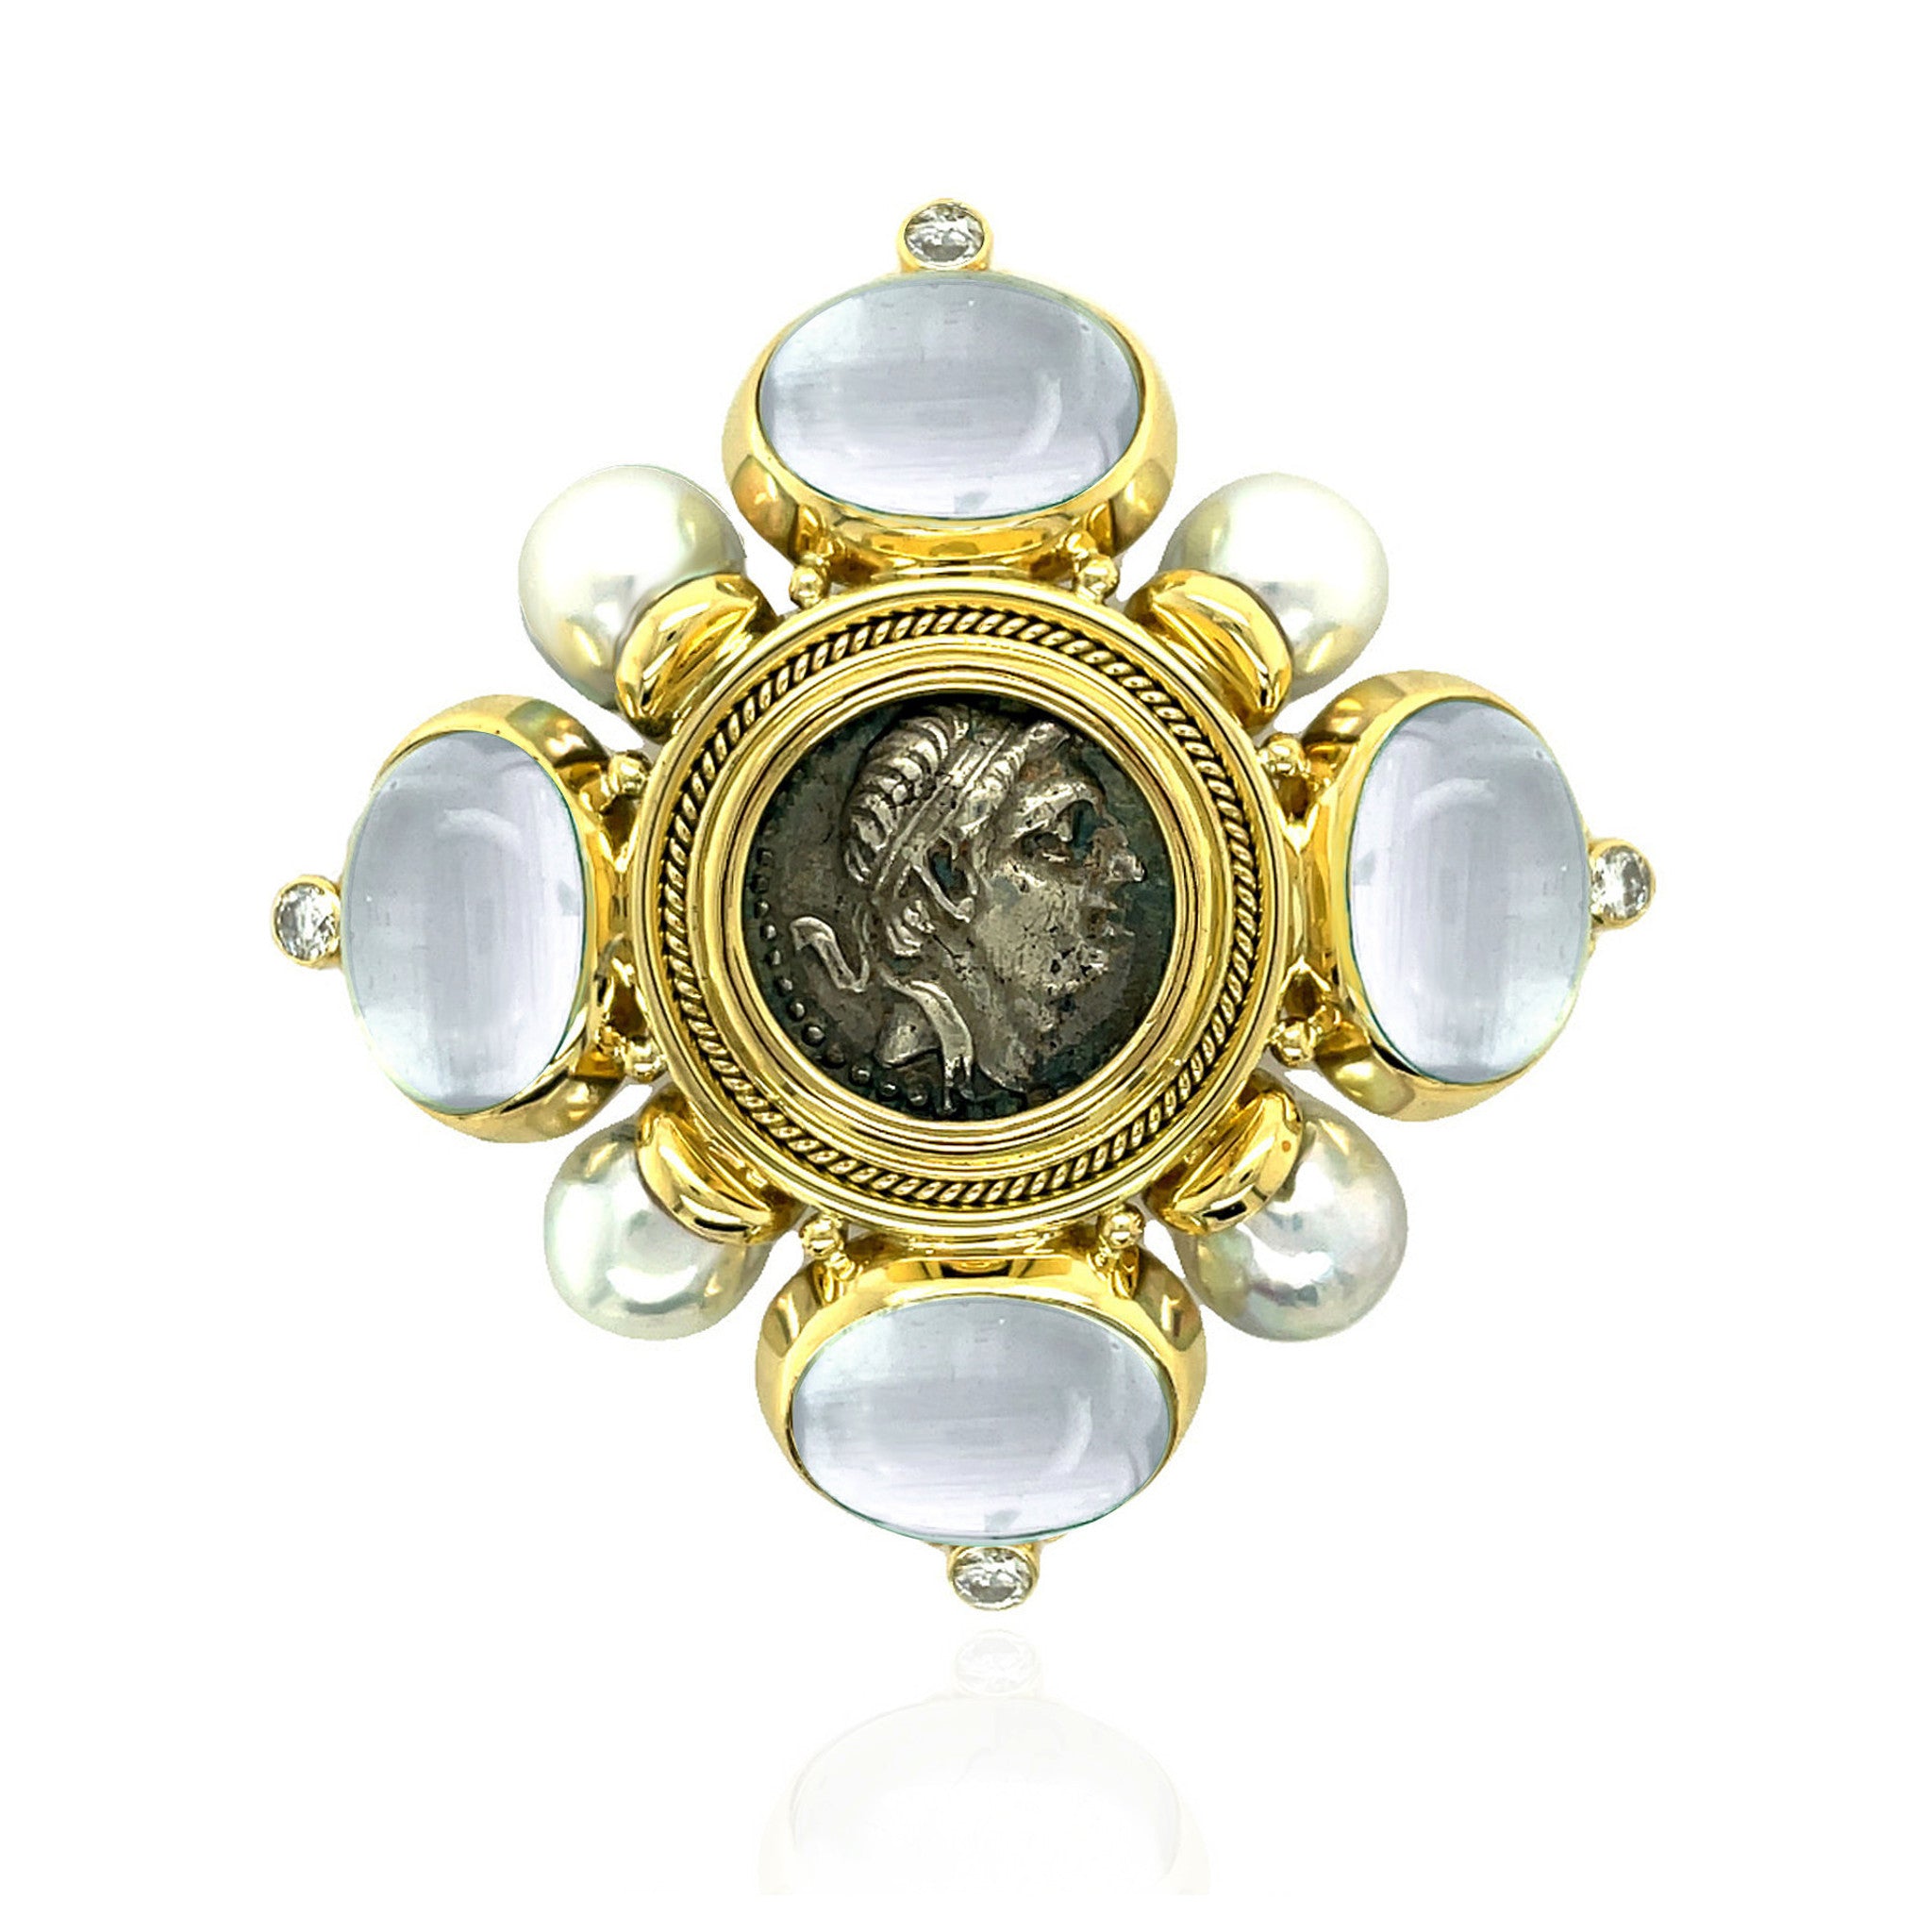 Elizabeth Gage Kiss Pin with Diamond, Moonstone and Pearl